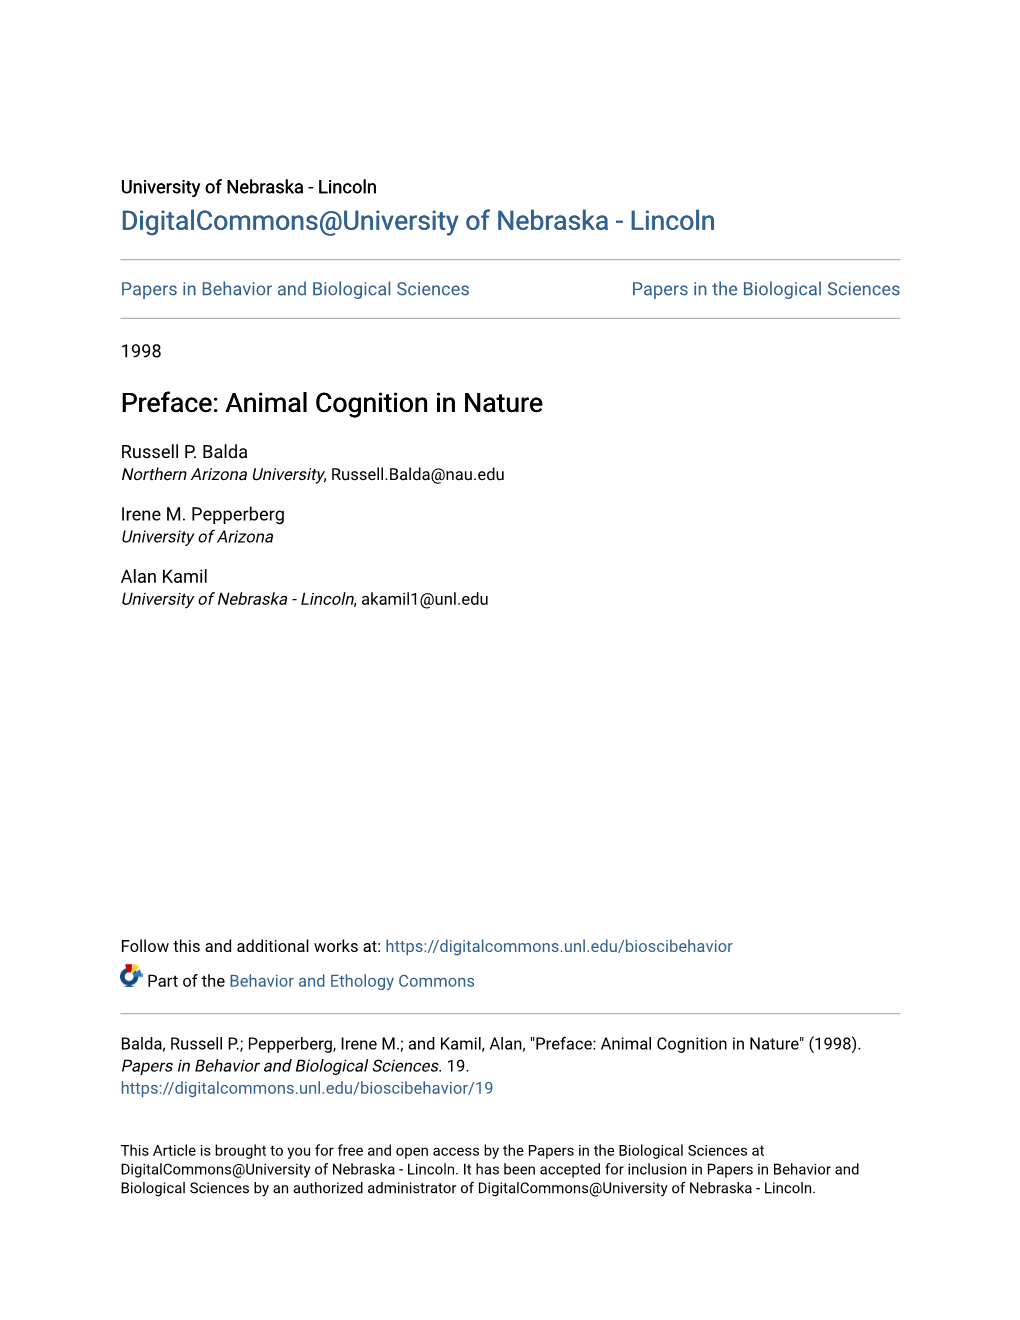 Preface: Animal Cognition in Nature